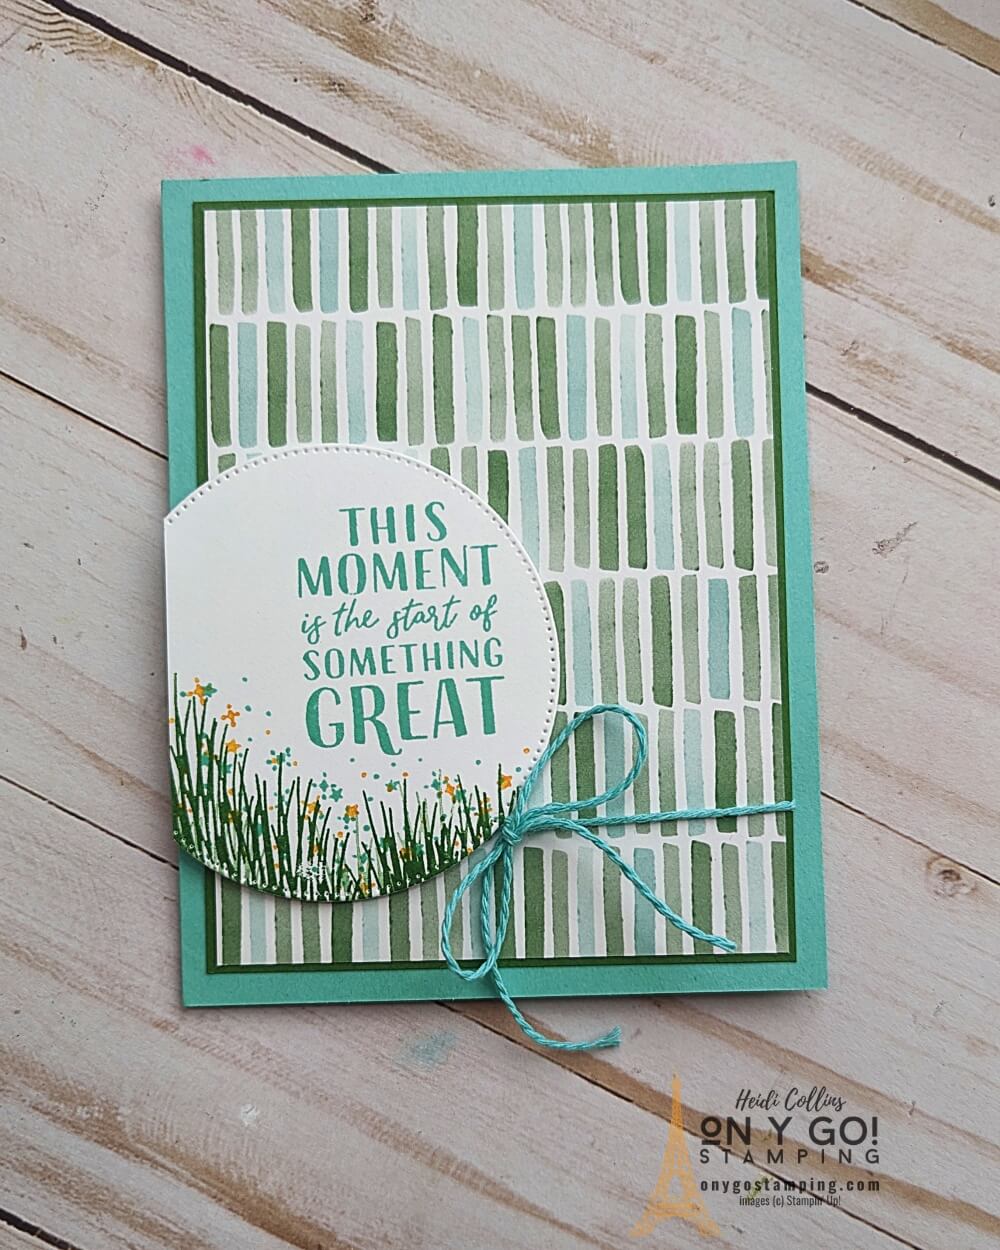 If you love making handmade cards, then you won't want to miss out on this great opportunity! The Enjoy the Journey Suite from Stampin' Up! features the stunning Greatest Journey stamp set and beautiful patterned paper--all perfect for creating amazing cards. And the best part? You can get the patterned paper FREE during Sale-A-Bration 2023! So don't wait and get crafting today!